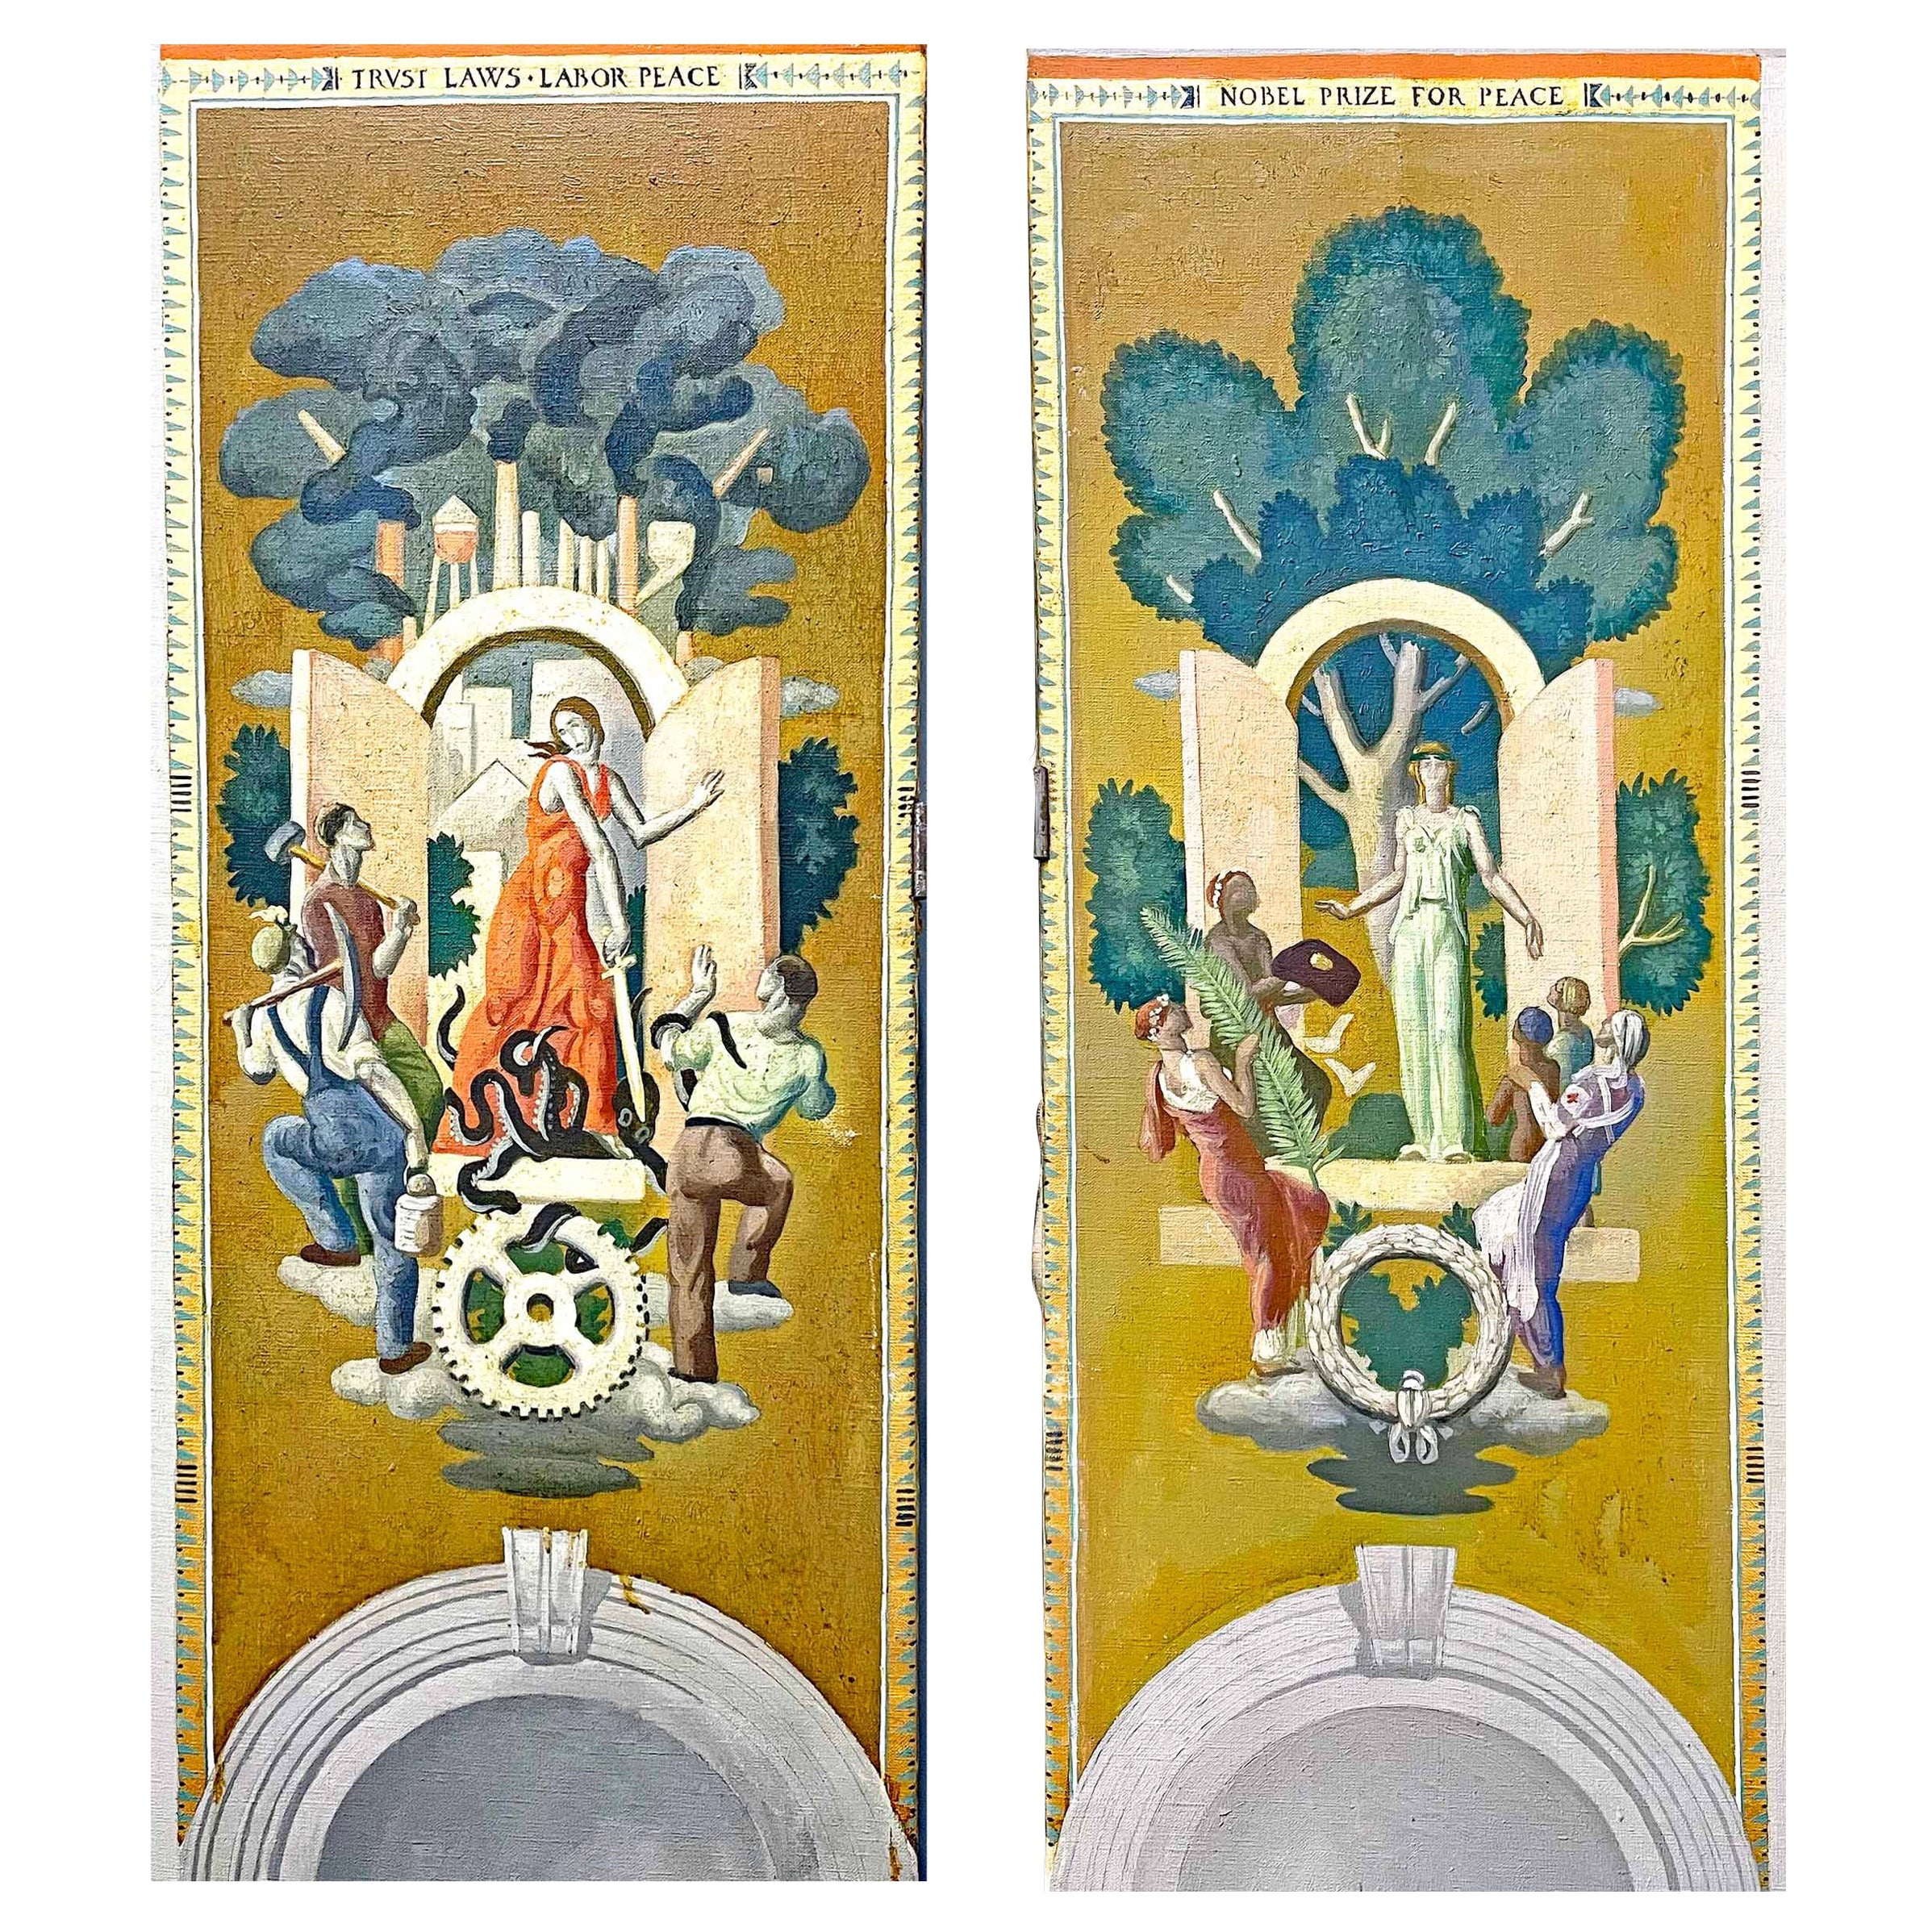 "Nobel Prize for Peace", Pair of Mural Paintings by Savage, "Trust Law Labor" For Sale